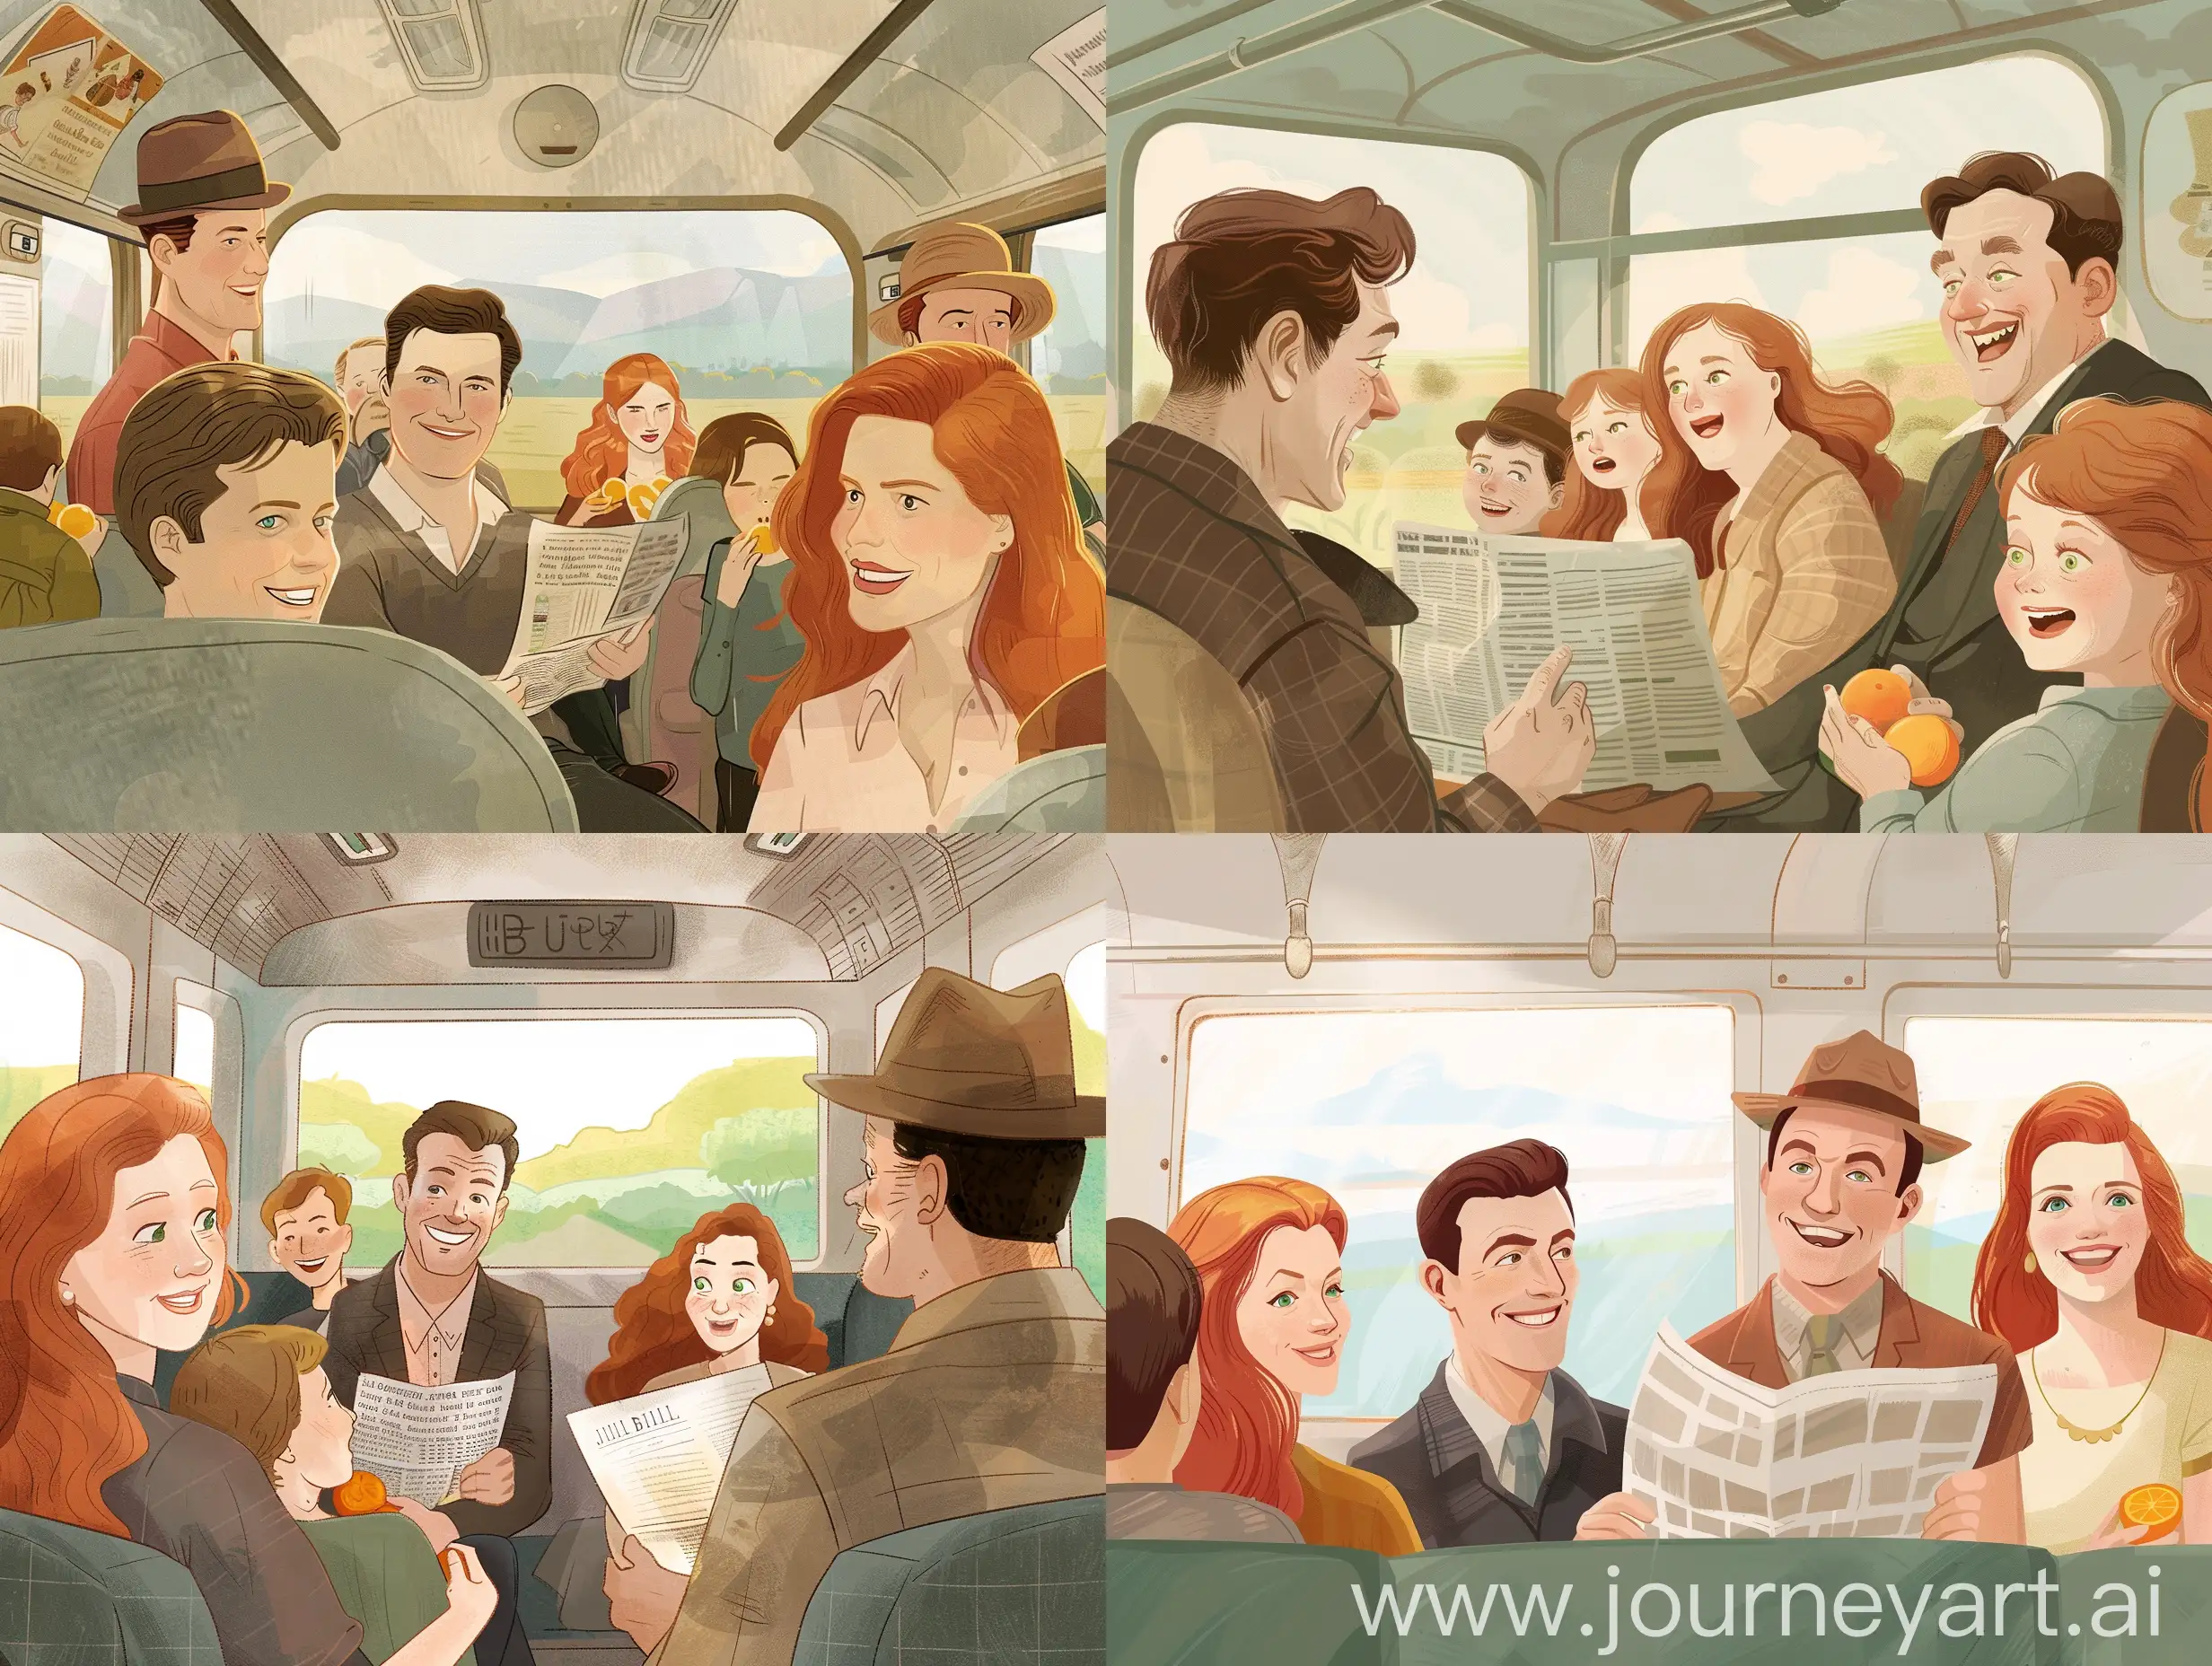 A 2D illustration of a train carriage interior in soft colors, depicting some of the characters and elements from the story. There is a man with short brown hair and a happy smile, his wife Julie with long red hair and green eyes looking bored as she gazes out the window at the English countryside going by. The tall dark stranger sits reading his newspaper, with a small smile in his eyes. The man in the brown hat laughs loudly at a joke while Bill smiles. Nearby, two children eat oranges as their tired mother looks on. Painted in a minimalistic style."